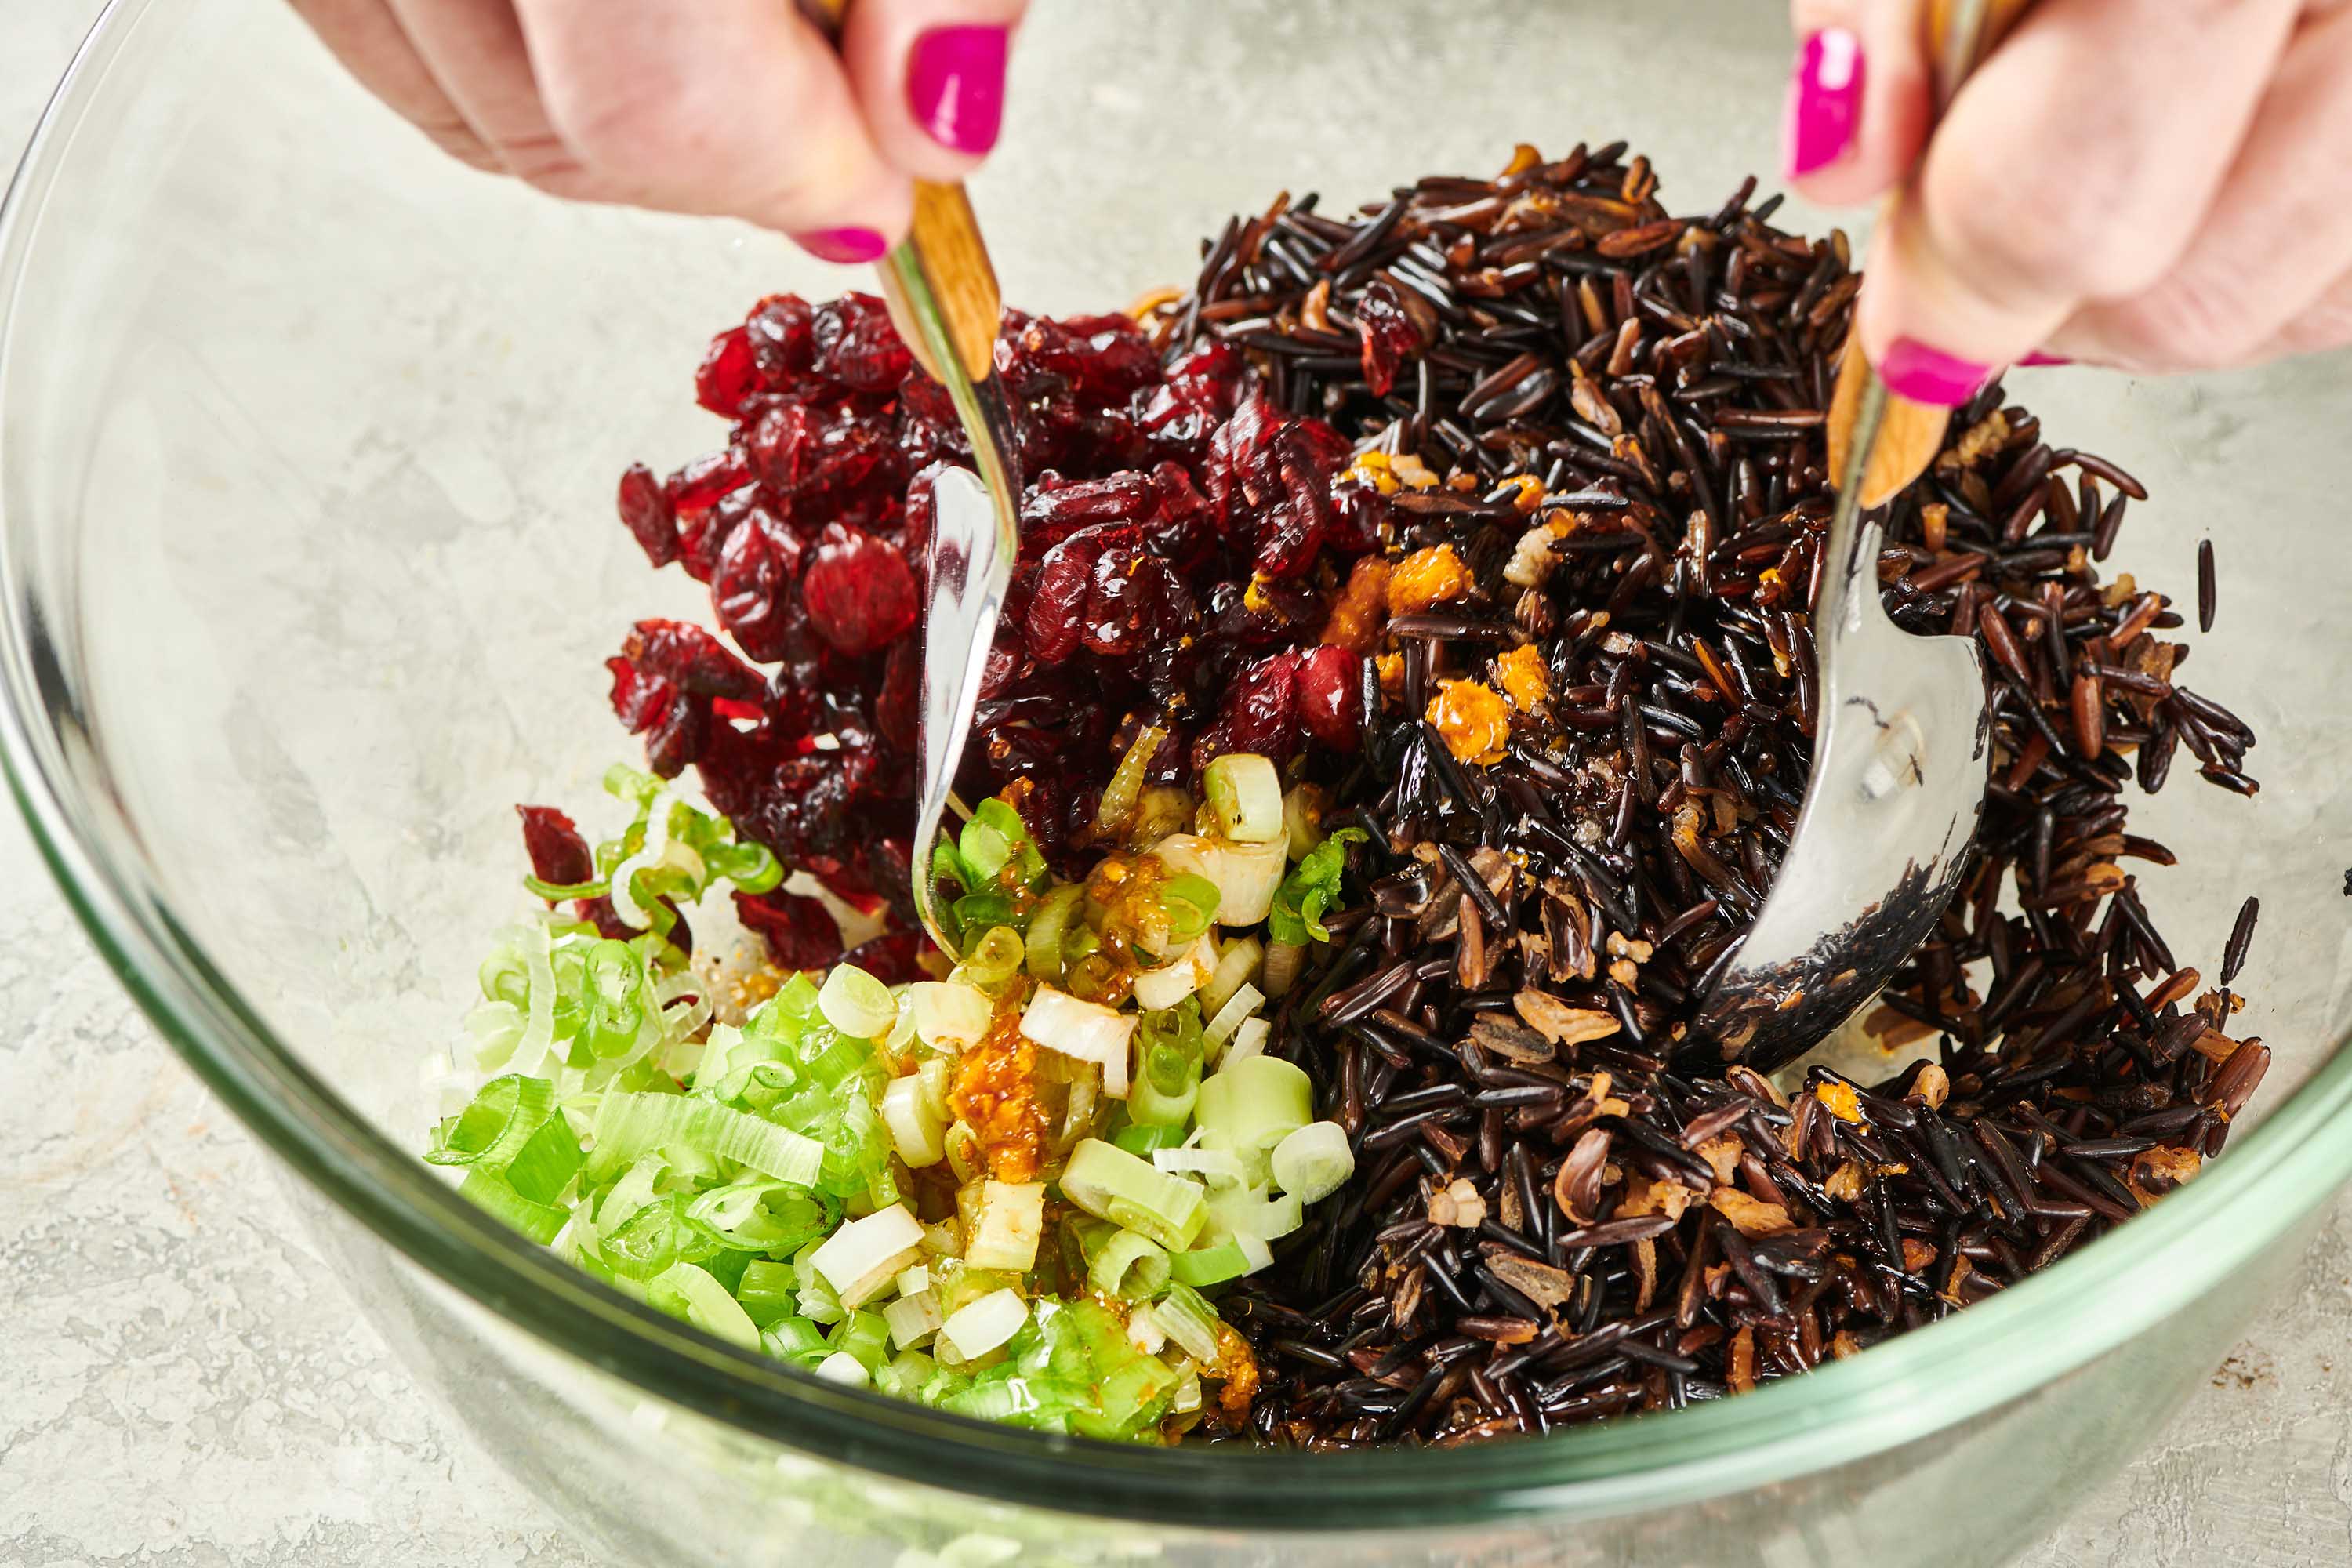 Woman using spoons to mix scallions, dired cranberries, and wild rice.